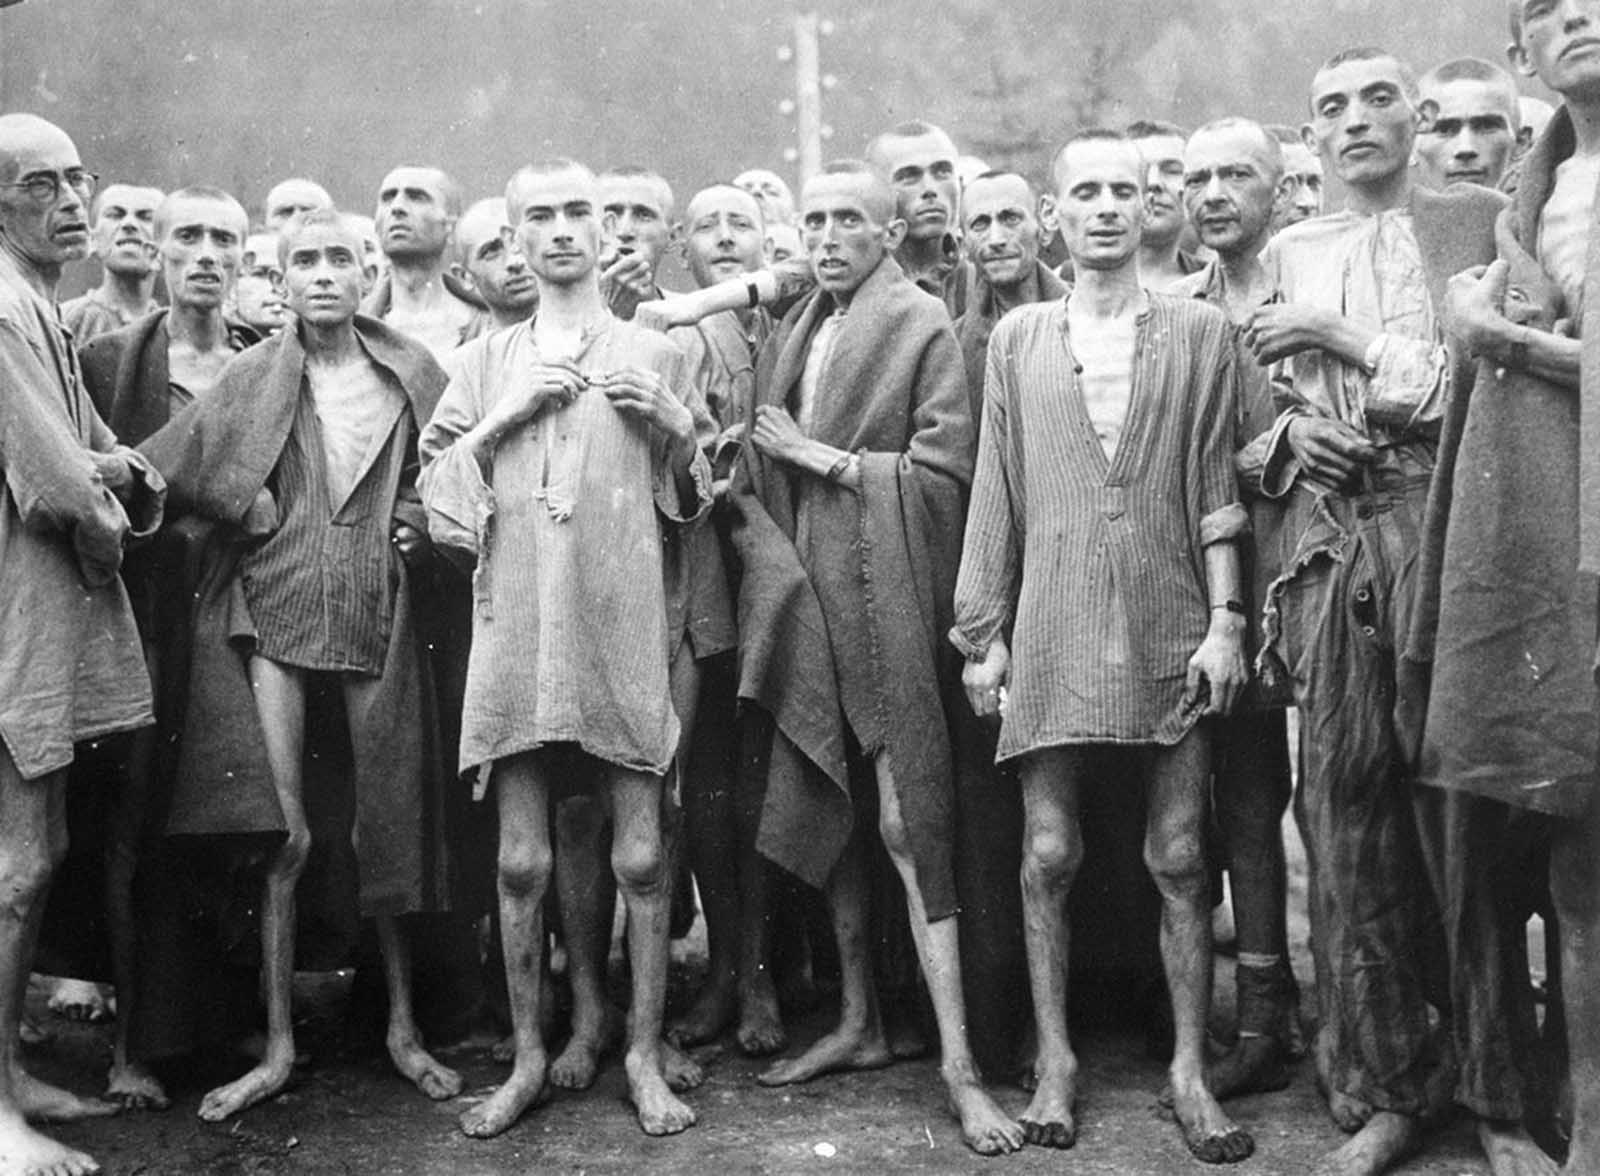 Starved prisoners, nearly dead from hunger, pose in a concentration camp in Ebensee, Austria, on May 7, 1945. The camp was reputedly used for 